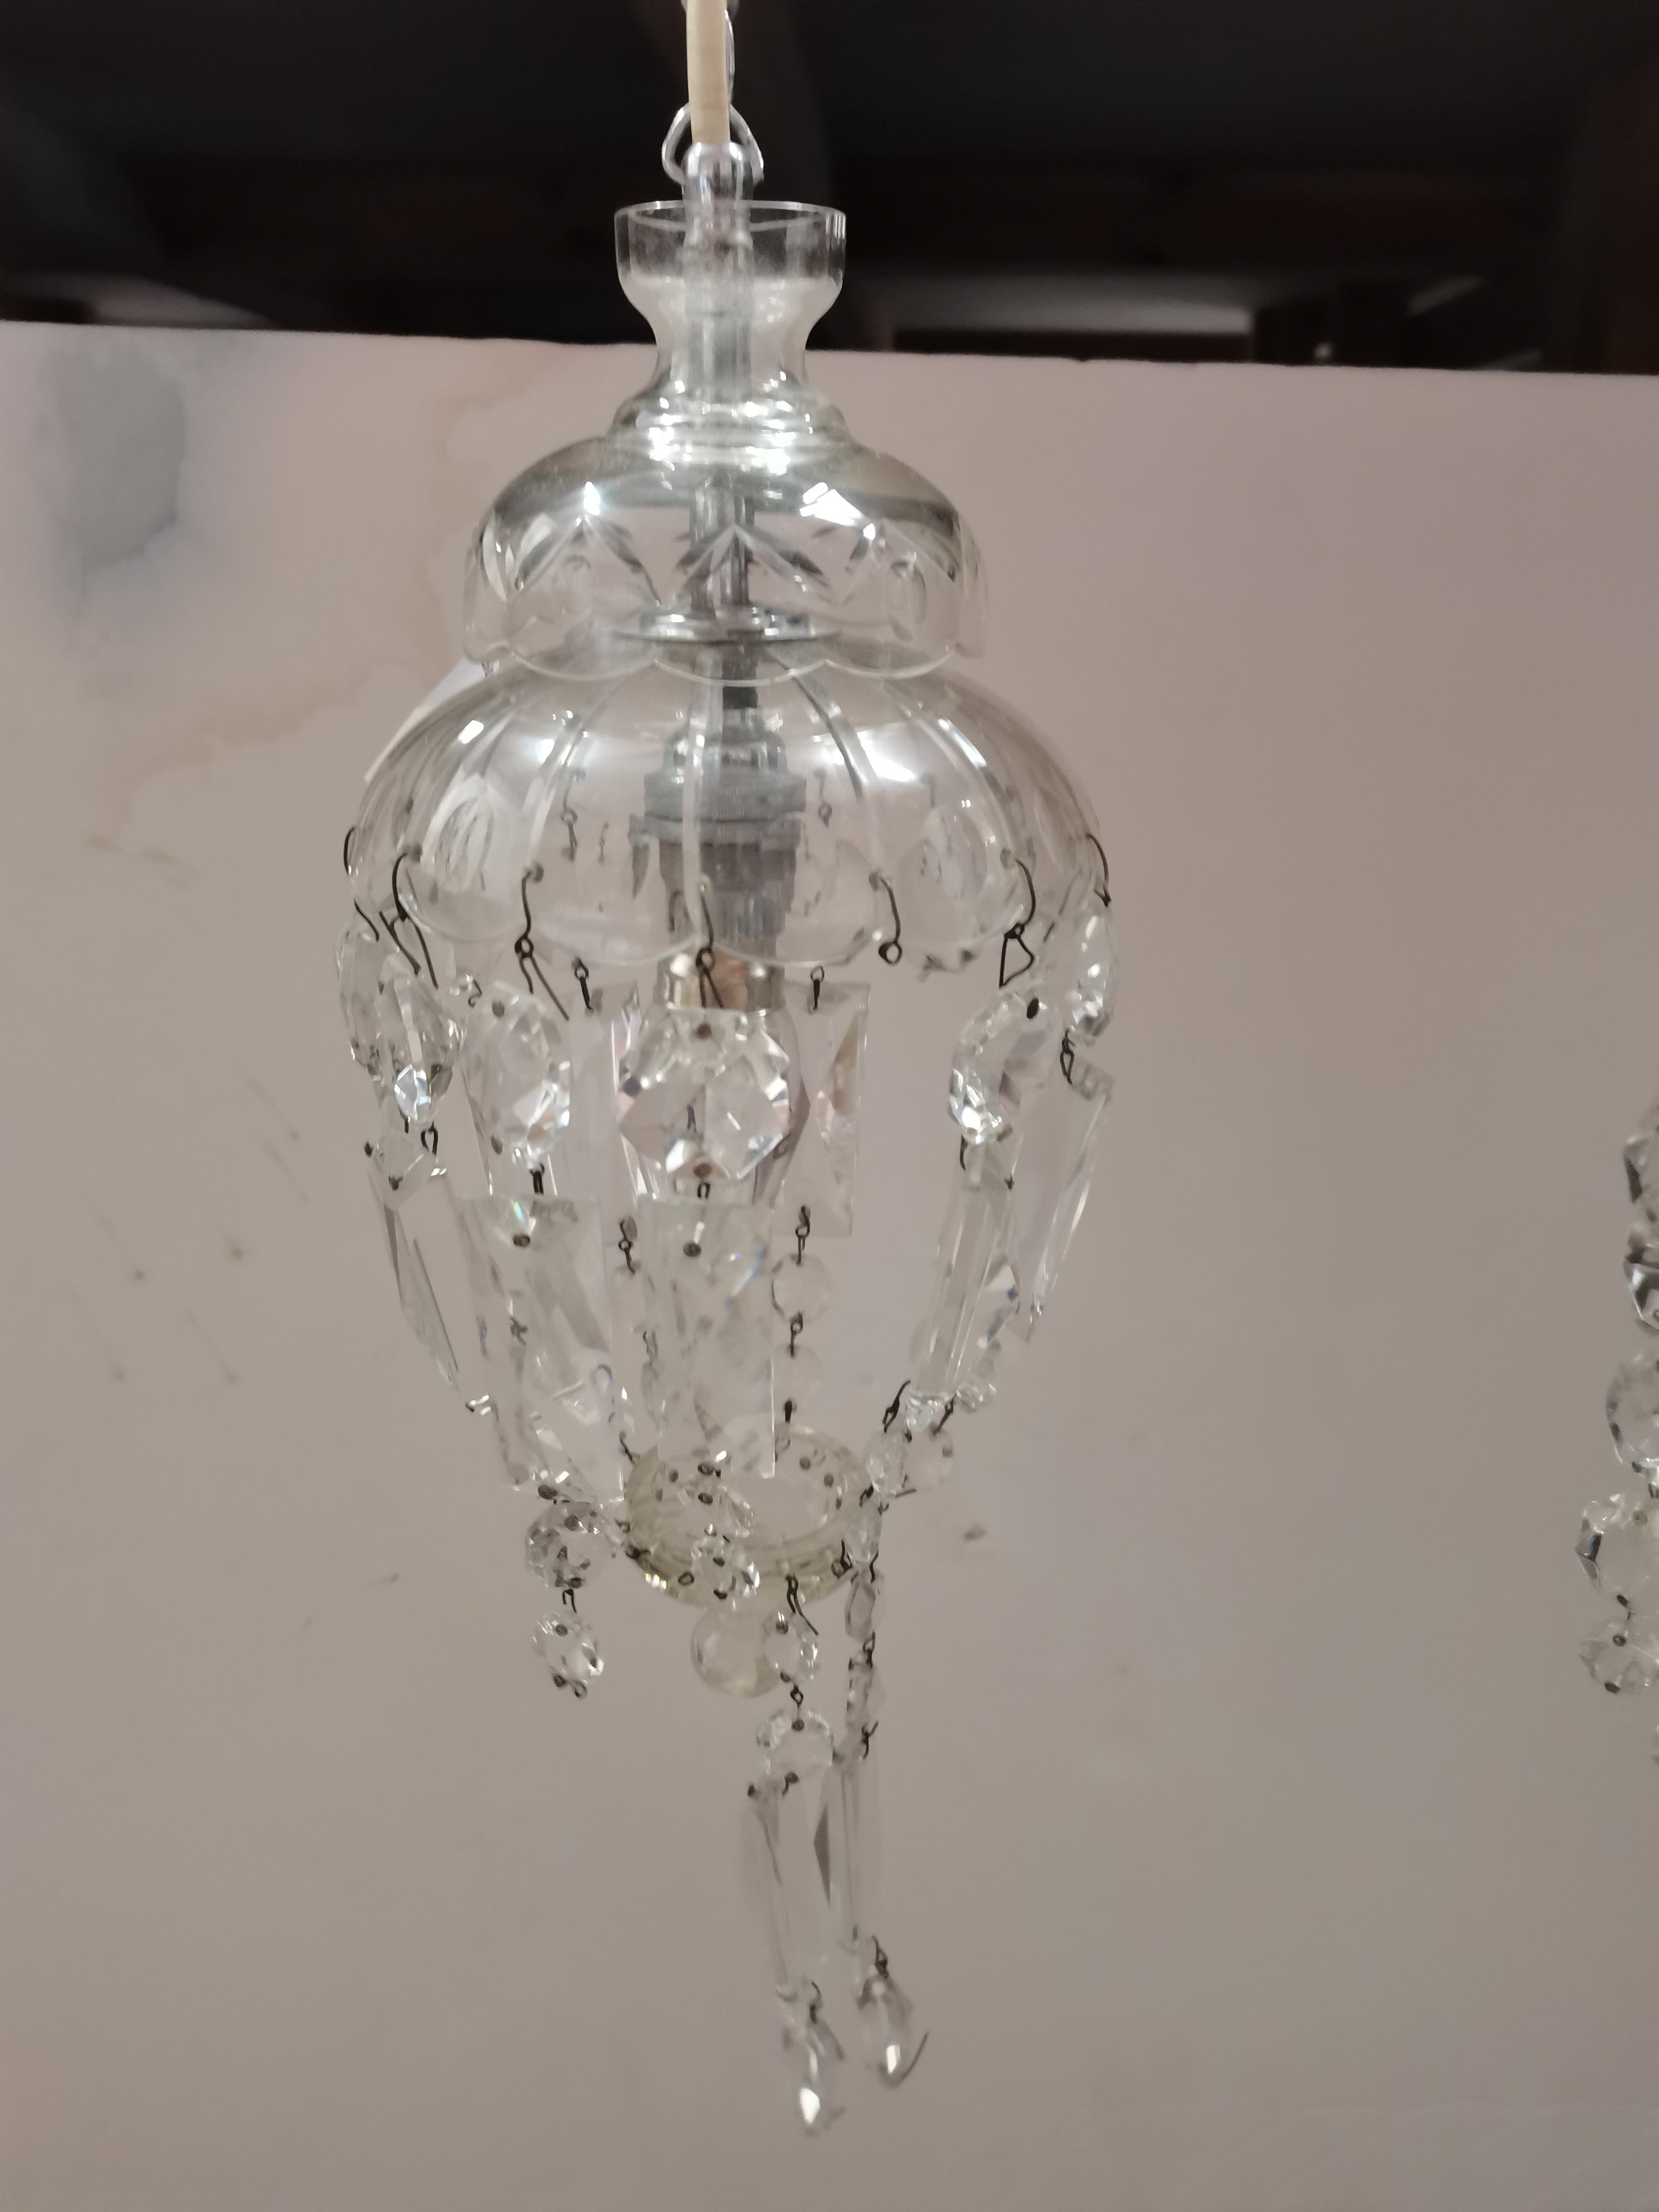 Pair of small glass chandeliers - Image 3 of 4